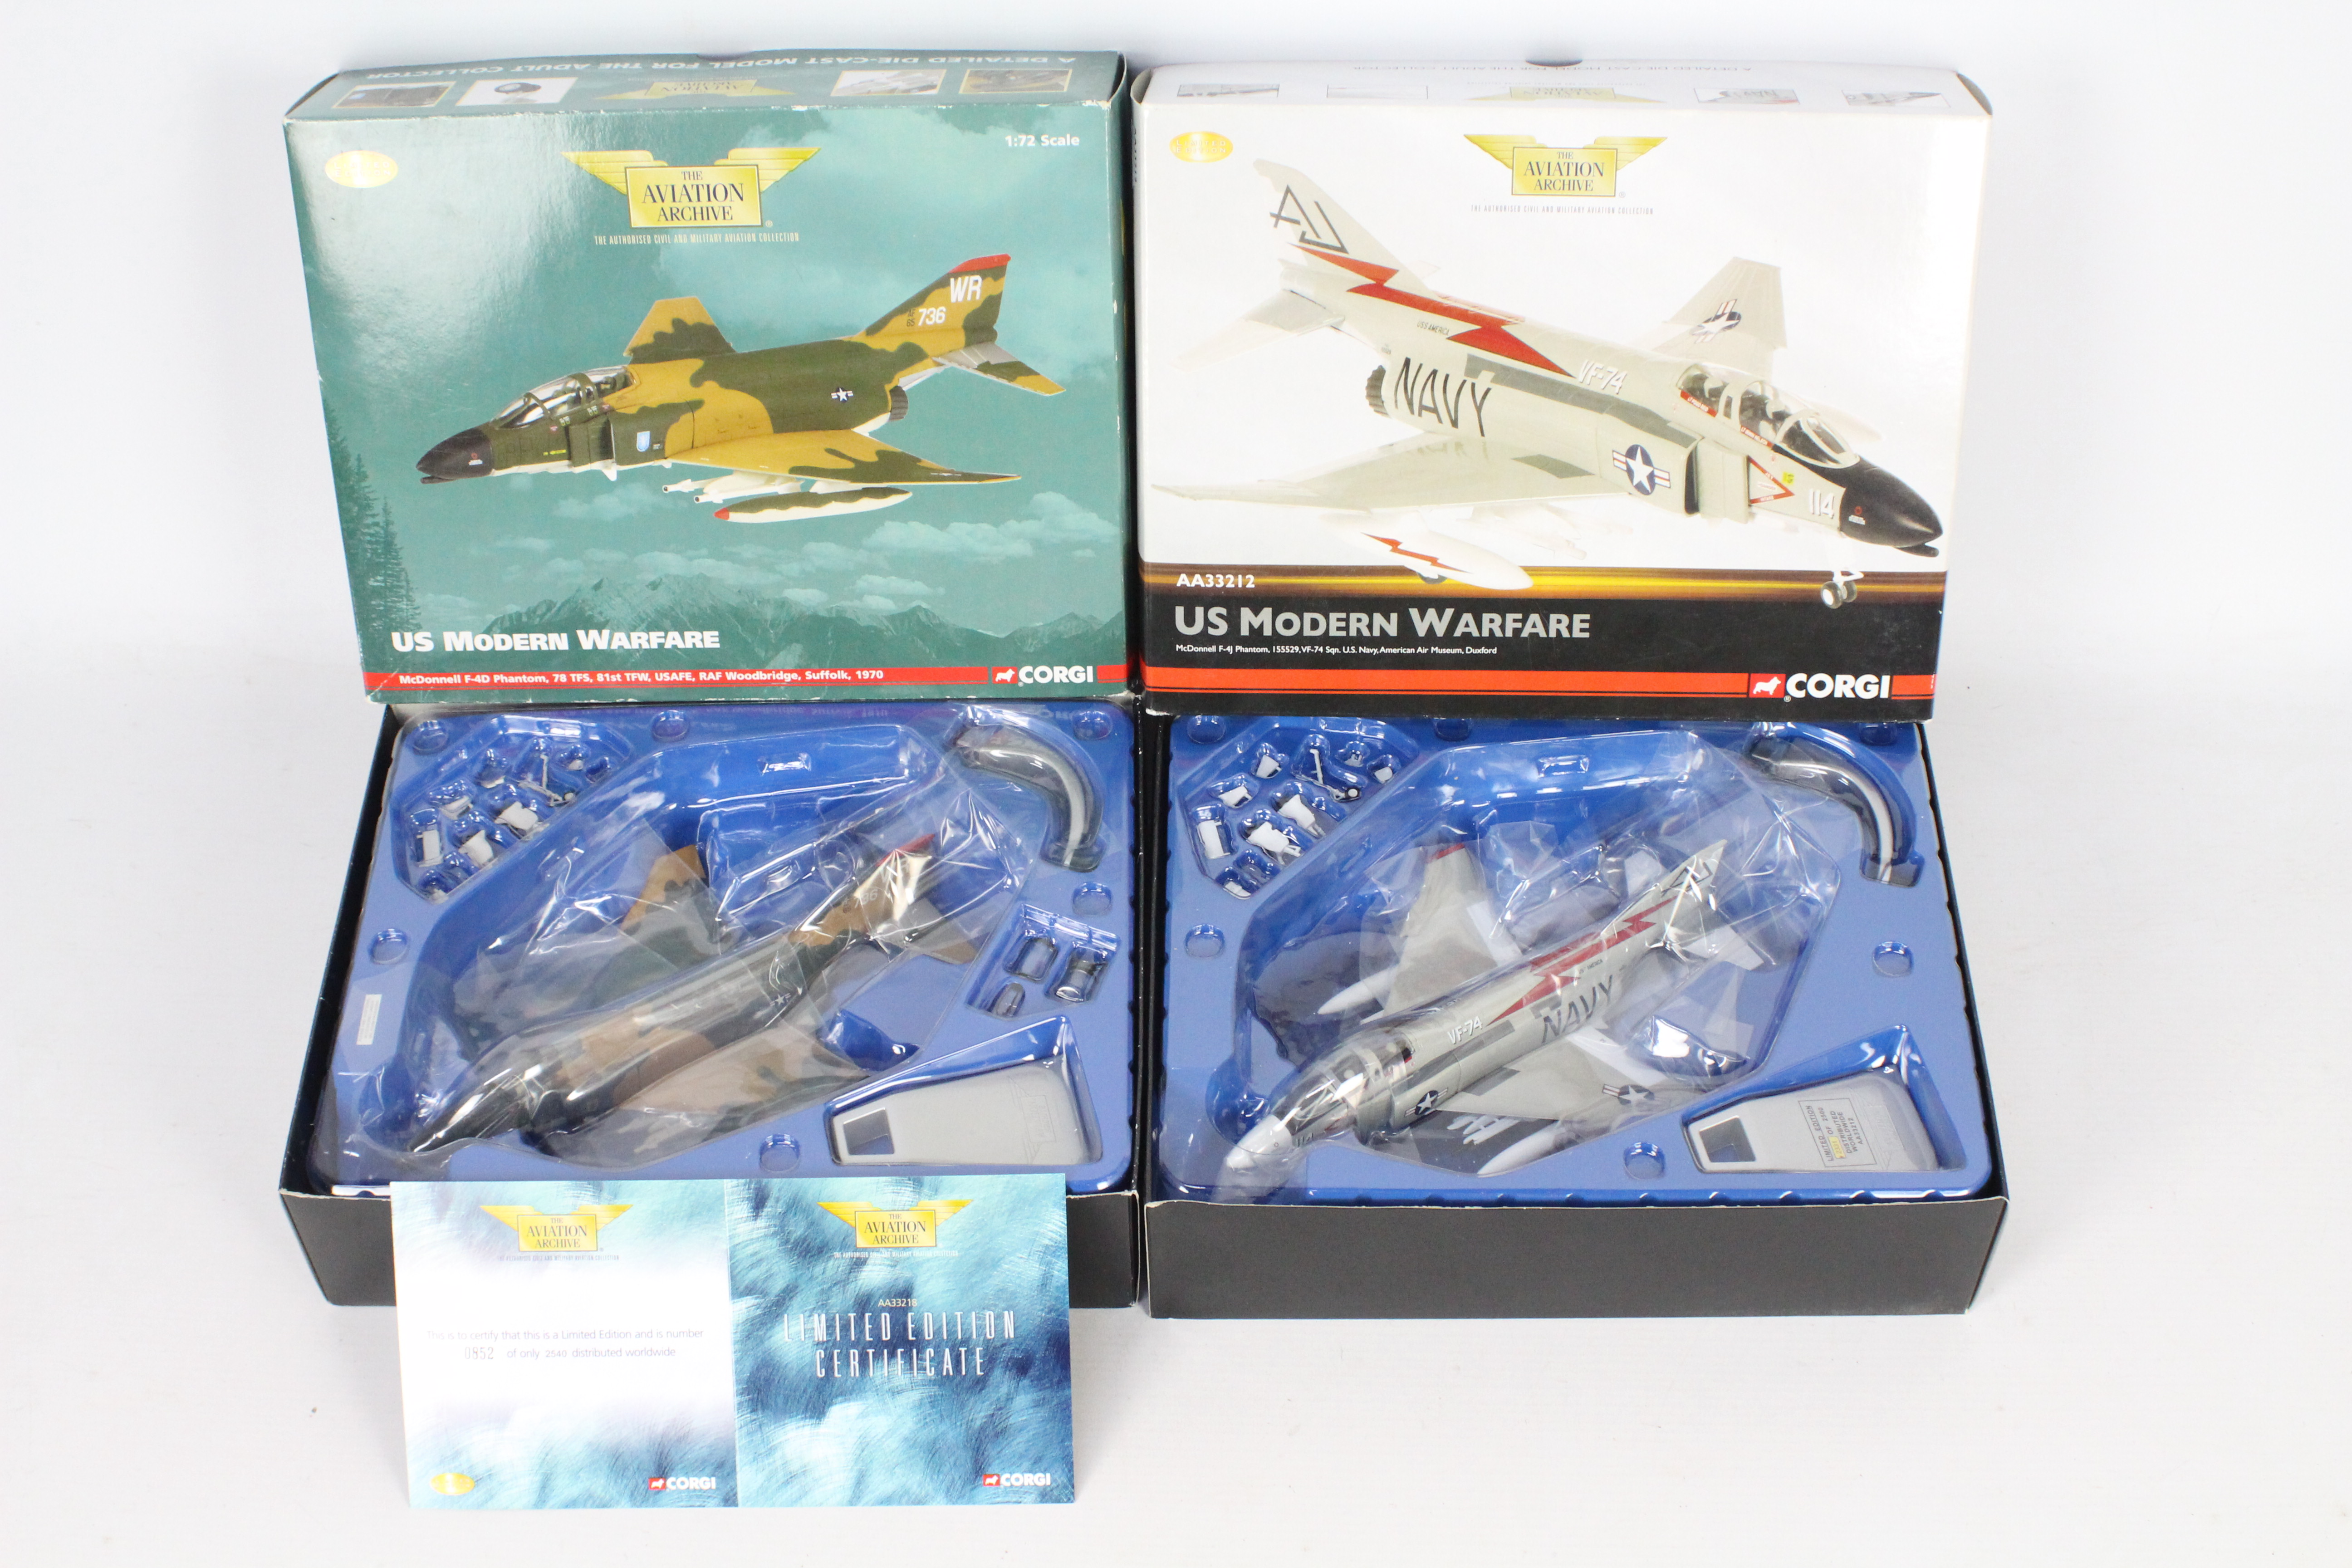 Corgi Aviation Archive - Two boxed Limited Edition 1:72 scale Corgi Aviation Archive McDonnell F-4J